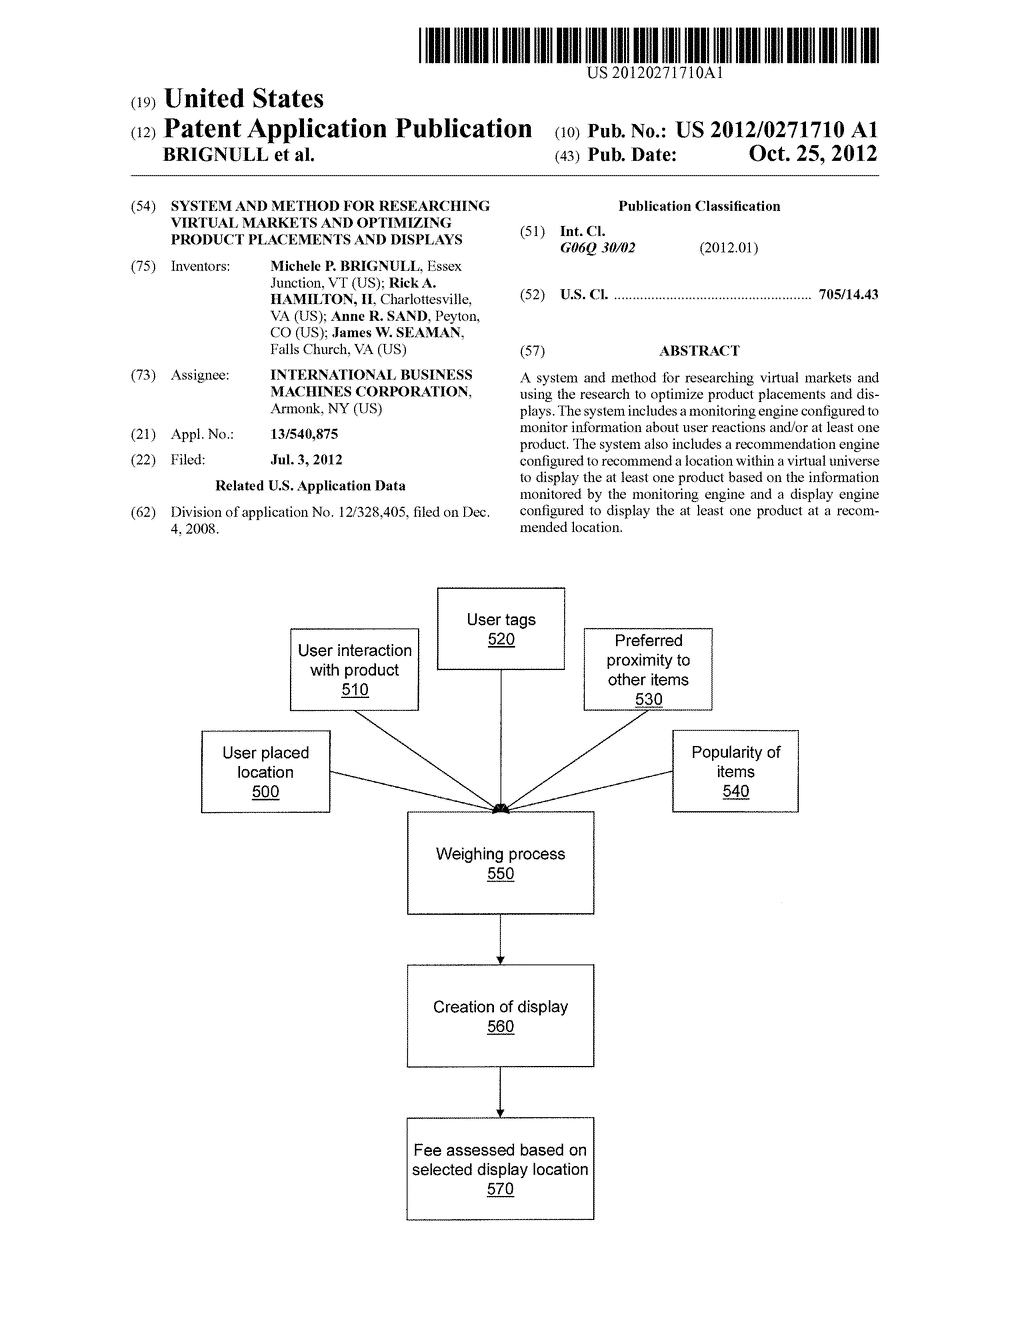 System and Method for Researching Virtual Markets and Optimizing Product     Placements and Displays - diagram, schematic, and image 01